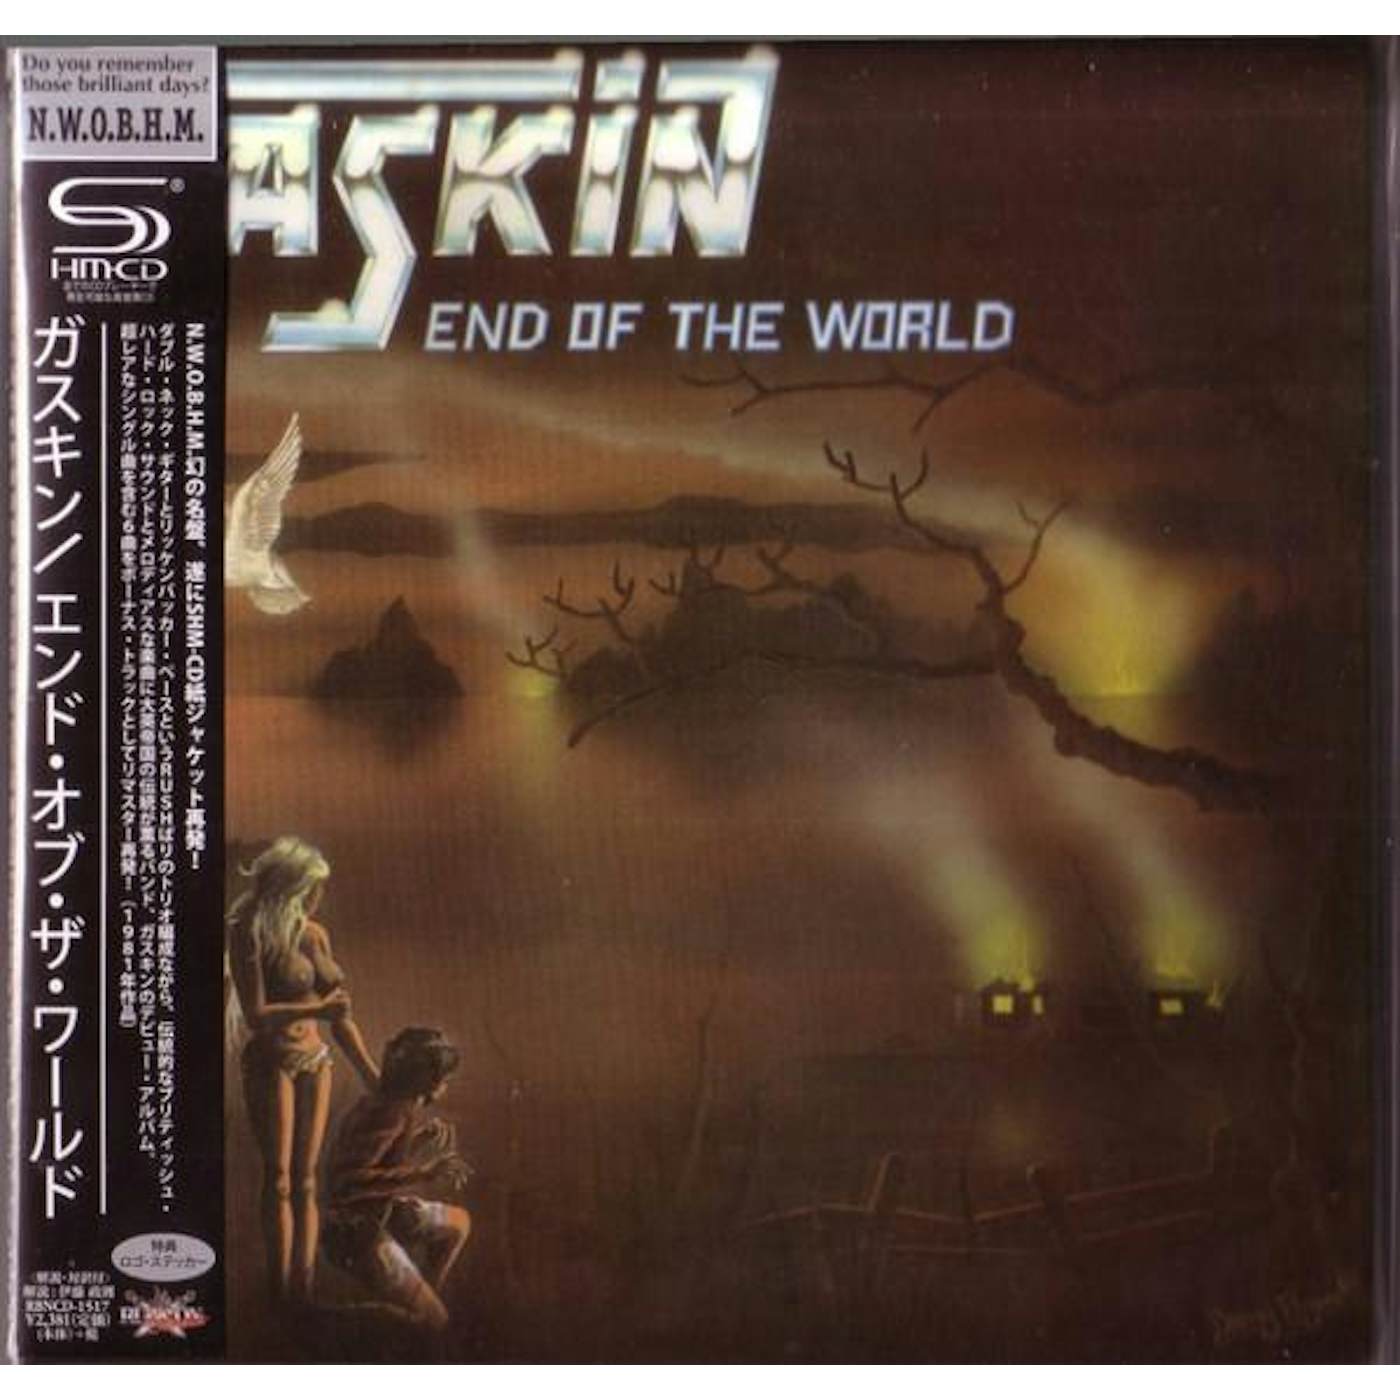 Gaskin END OF THE WORLD CD